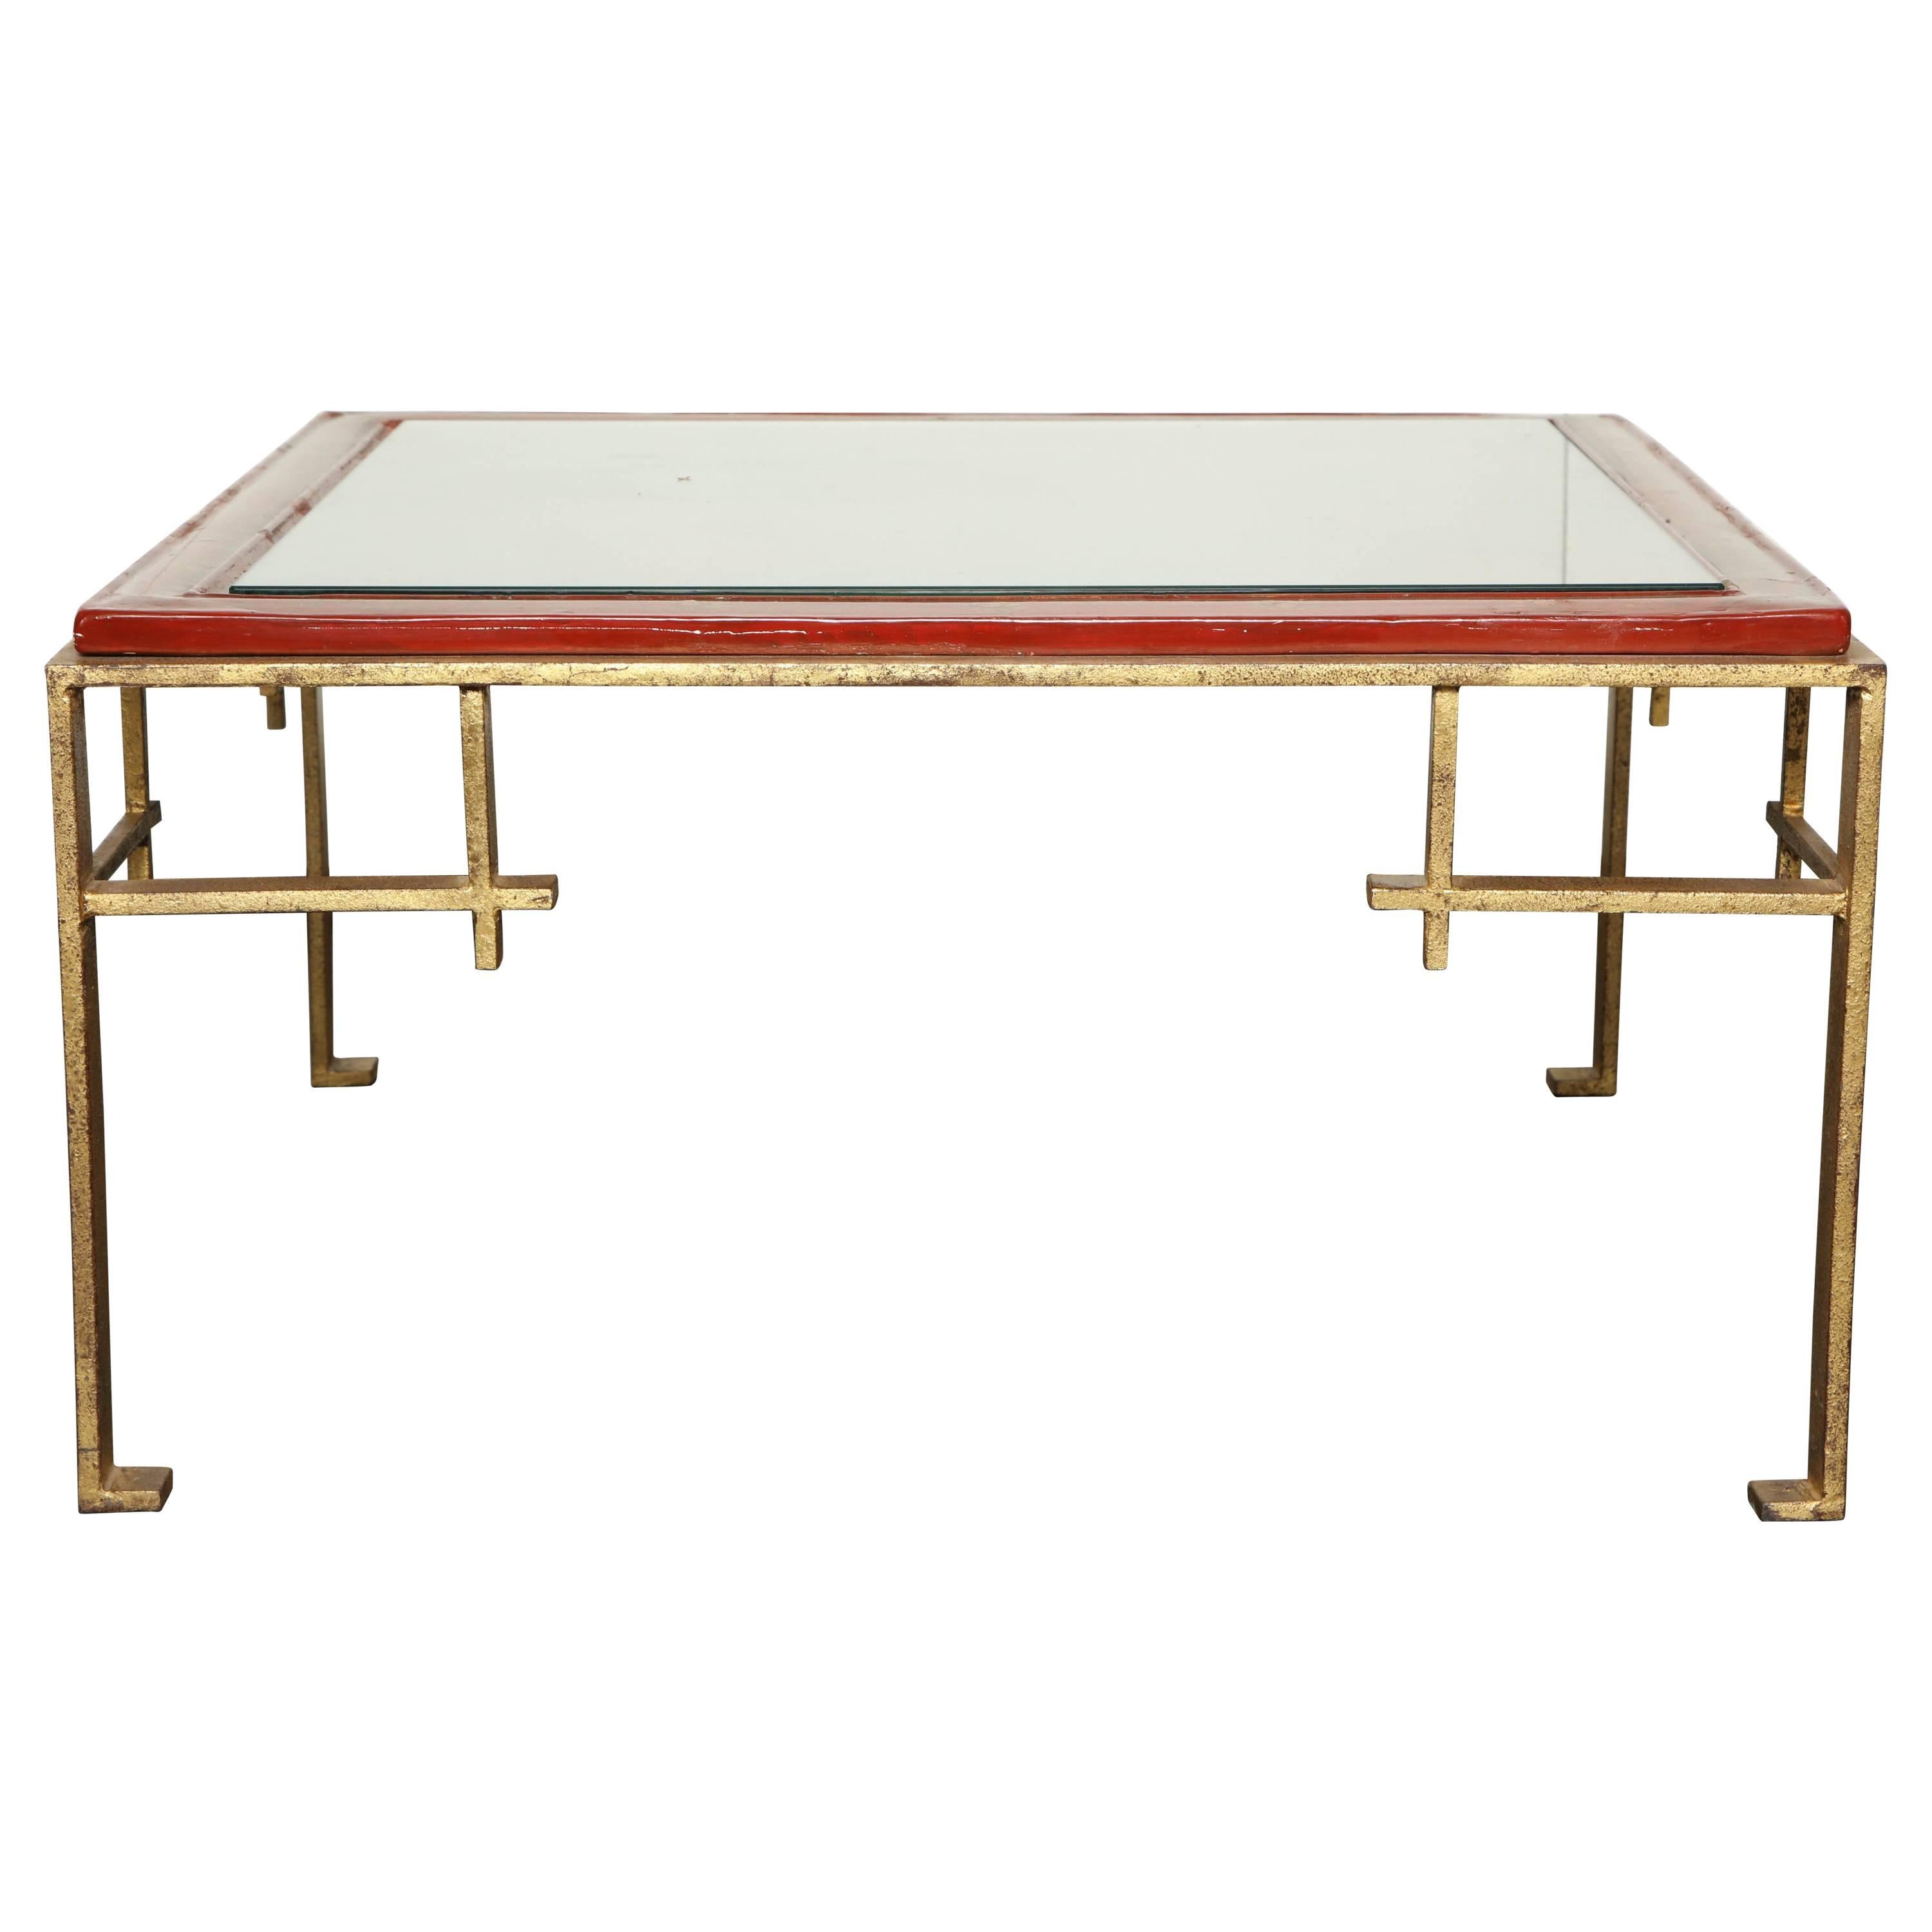 19th Century Cocktail Table with Red Coromandel Top For Sale